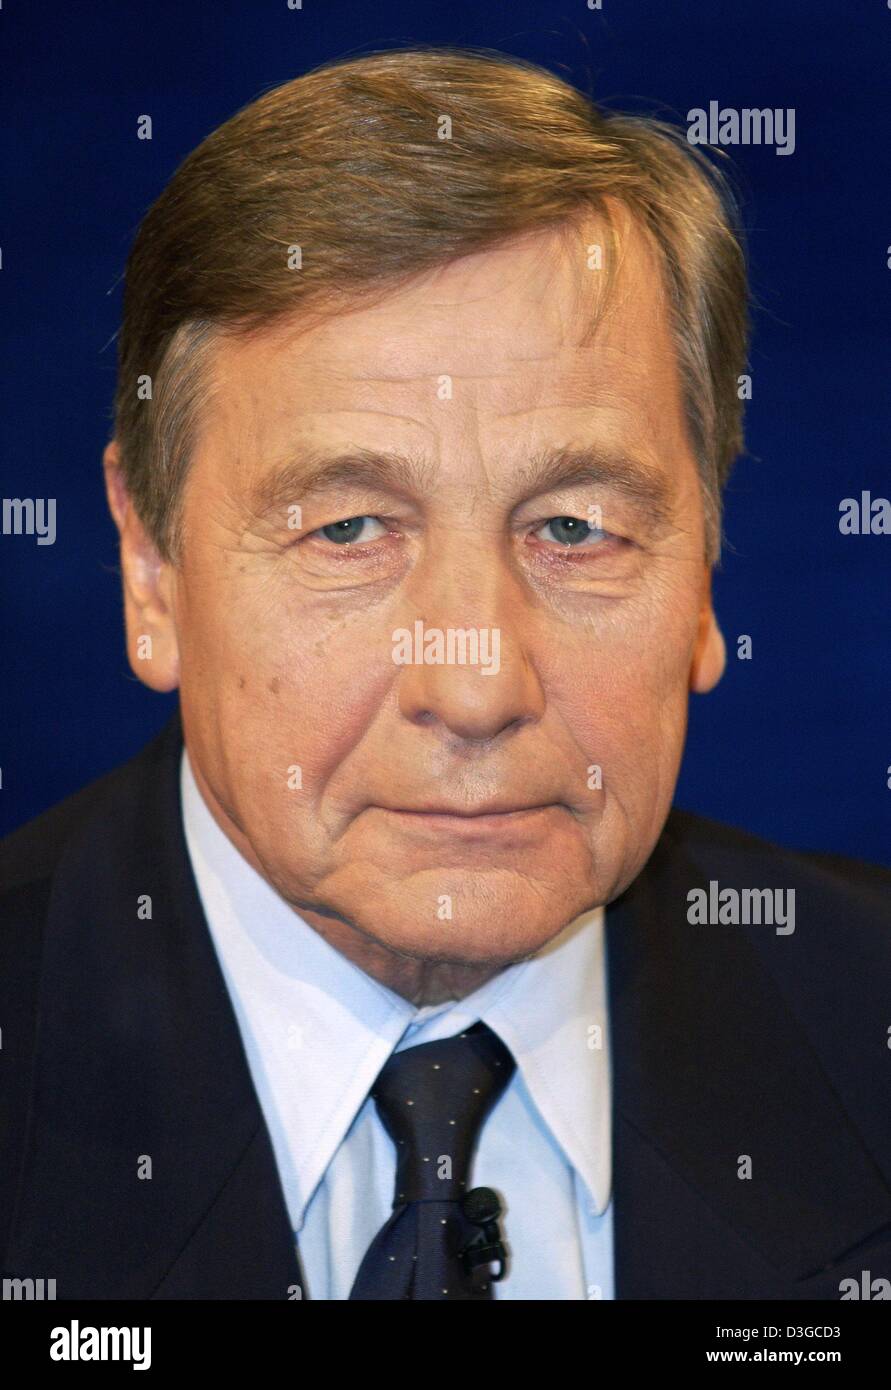 (dpa) - German Minister for Economic Affairs Wolfgang Clement during a talk show on German television in Berlin, Germany, 17 October 2004. The television show centred on the dire economic state of the German automotive sector. Stock Photo